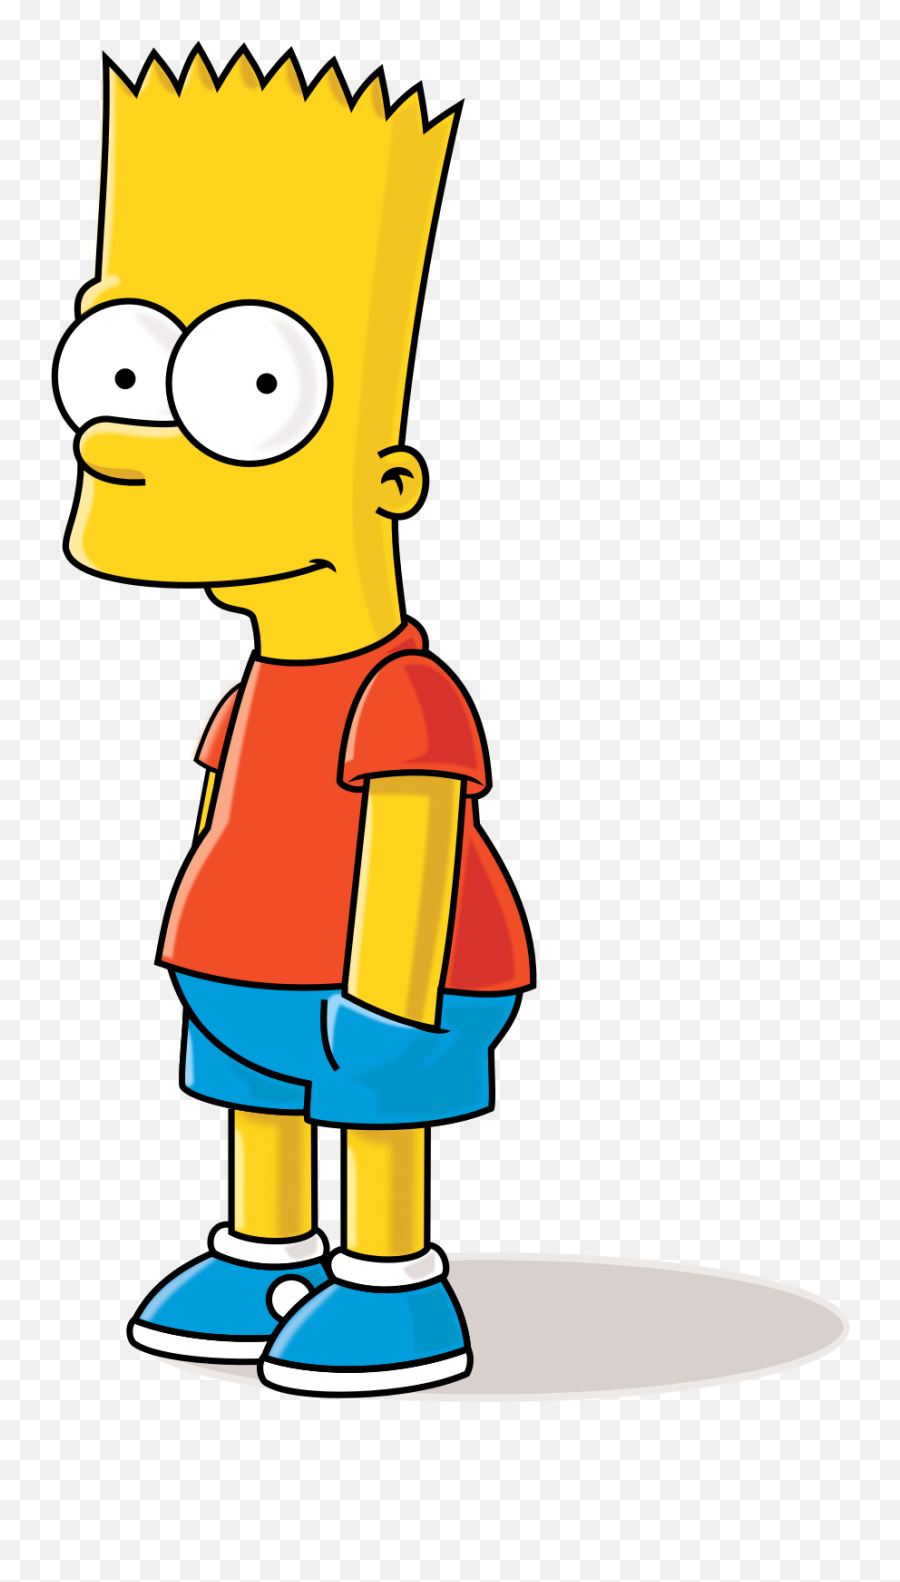 Best Of The Simpsons Ideas In 2021 - Bart Simpson Clipart Emoji,The Only Emotions You Feel When Bart Meme